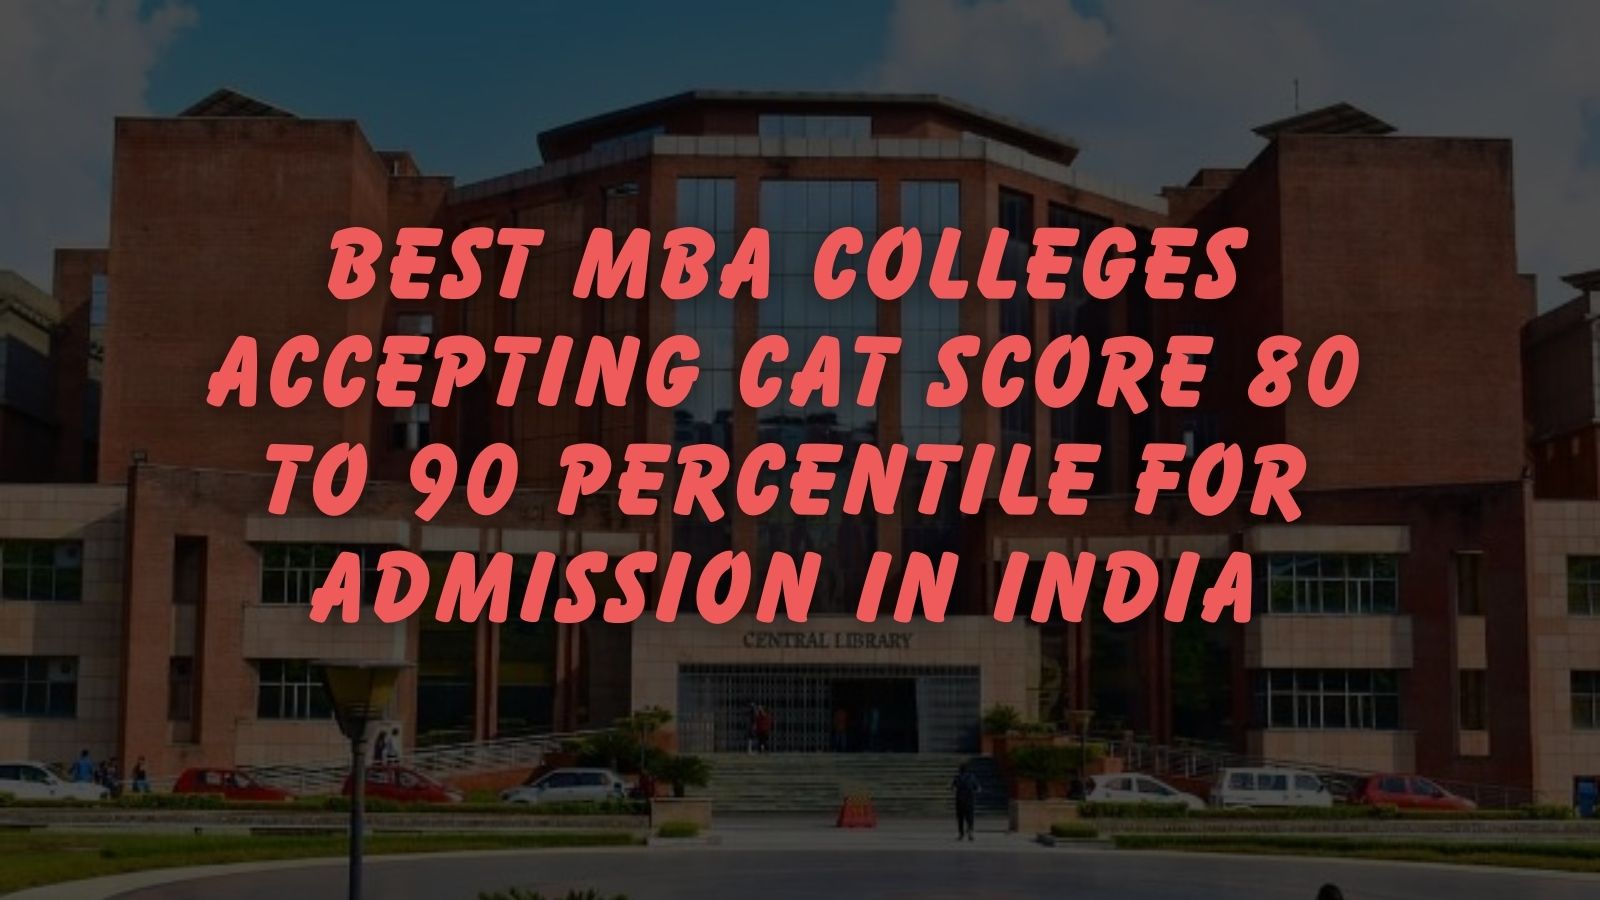 Best MBA Colleges Accepting CAT Score 80 to 90 Percentile for Admission in India